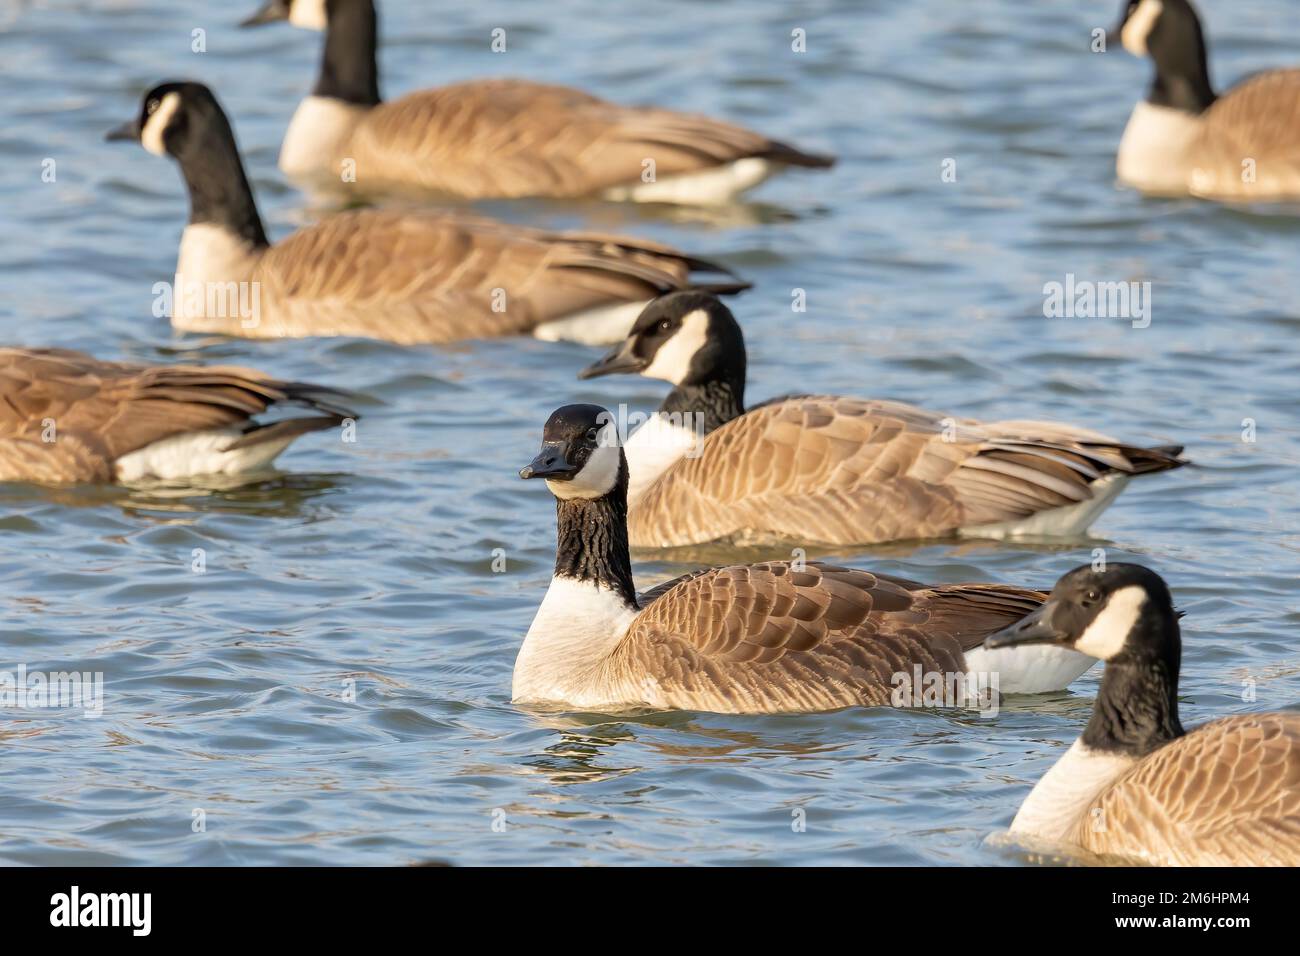 The Flock of Canada geese (Branta canadensis)  in a river Stock Photo